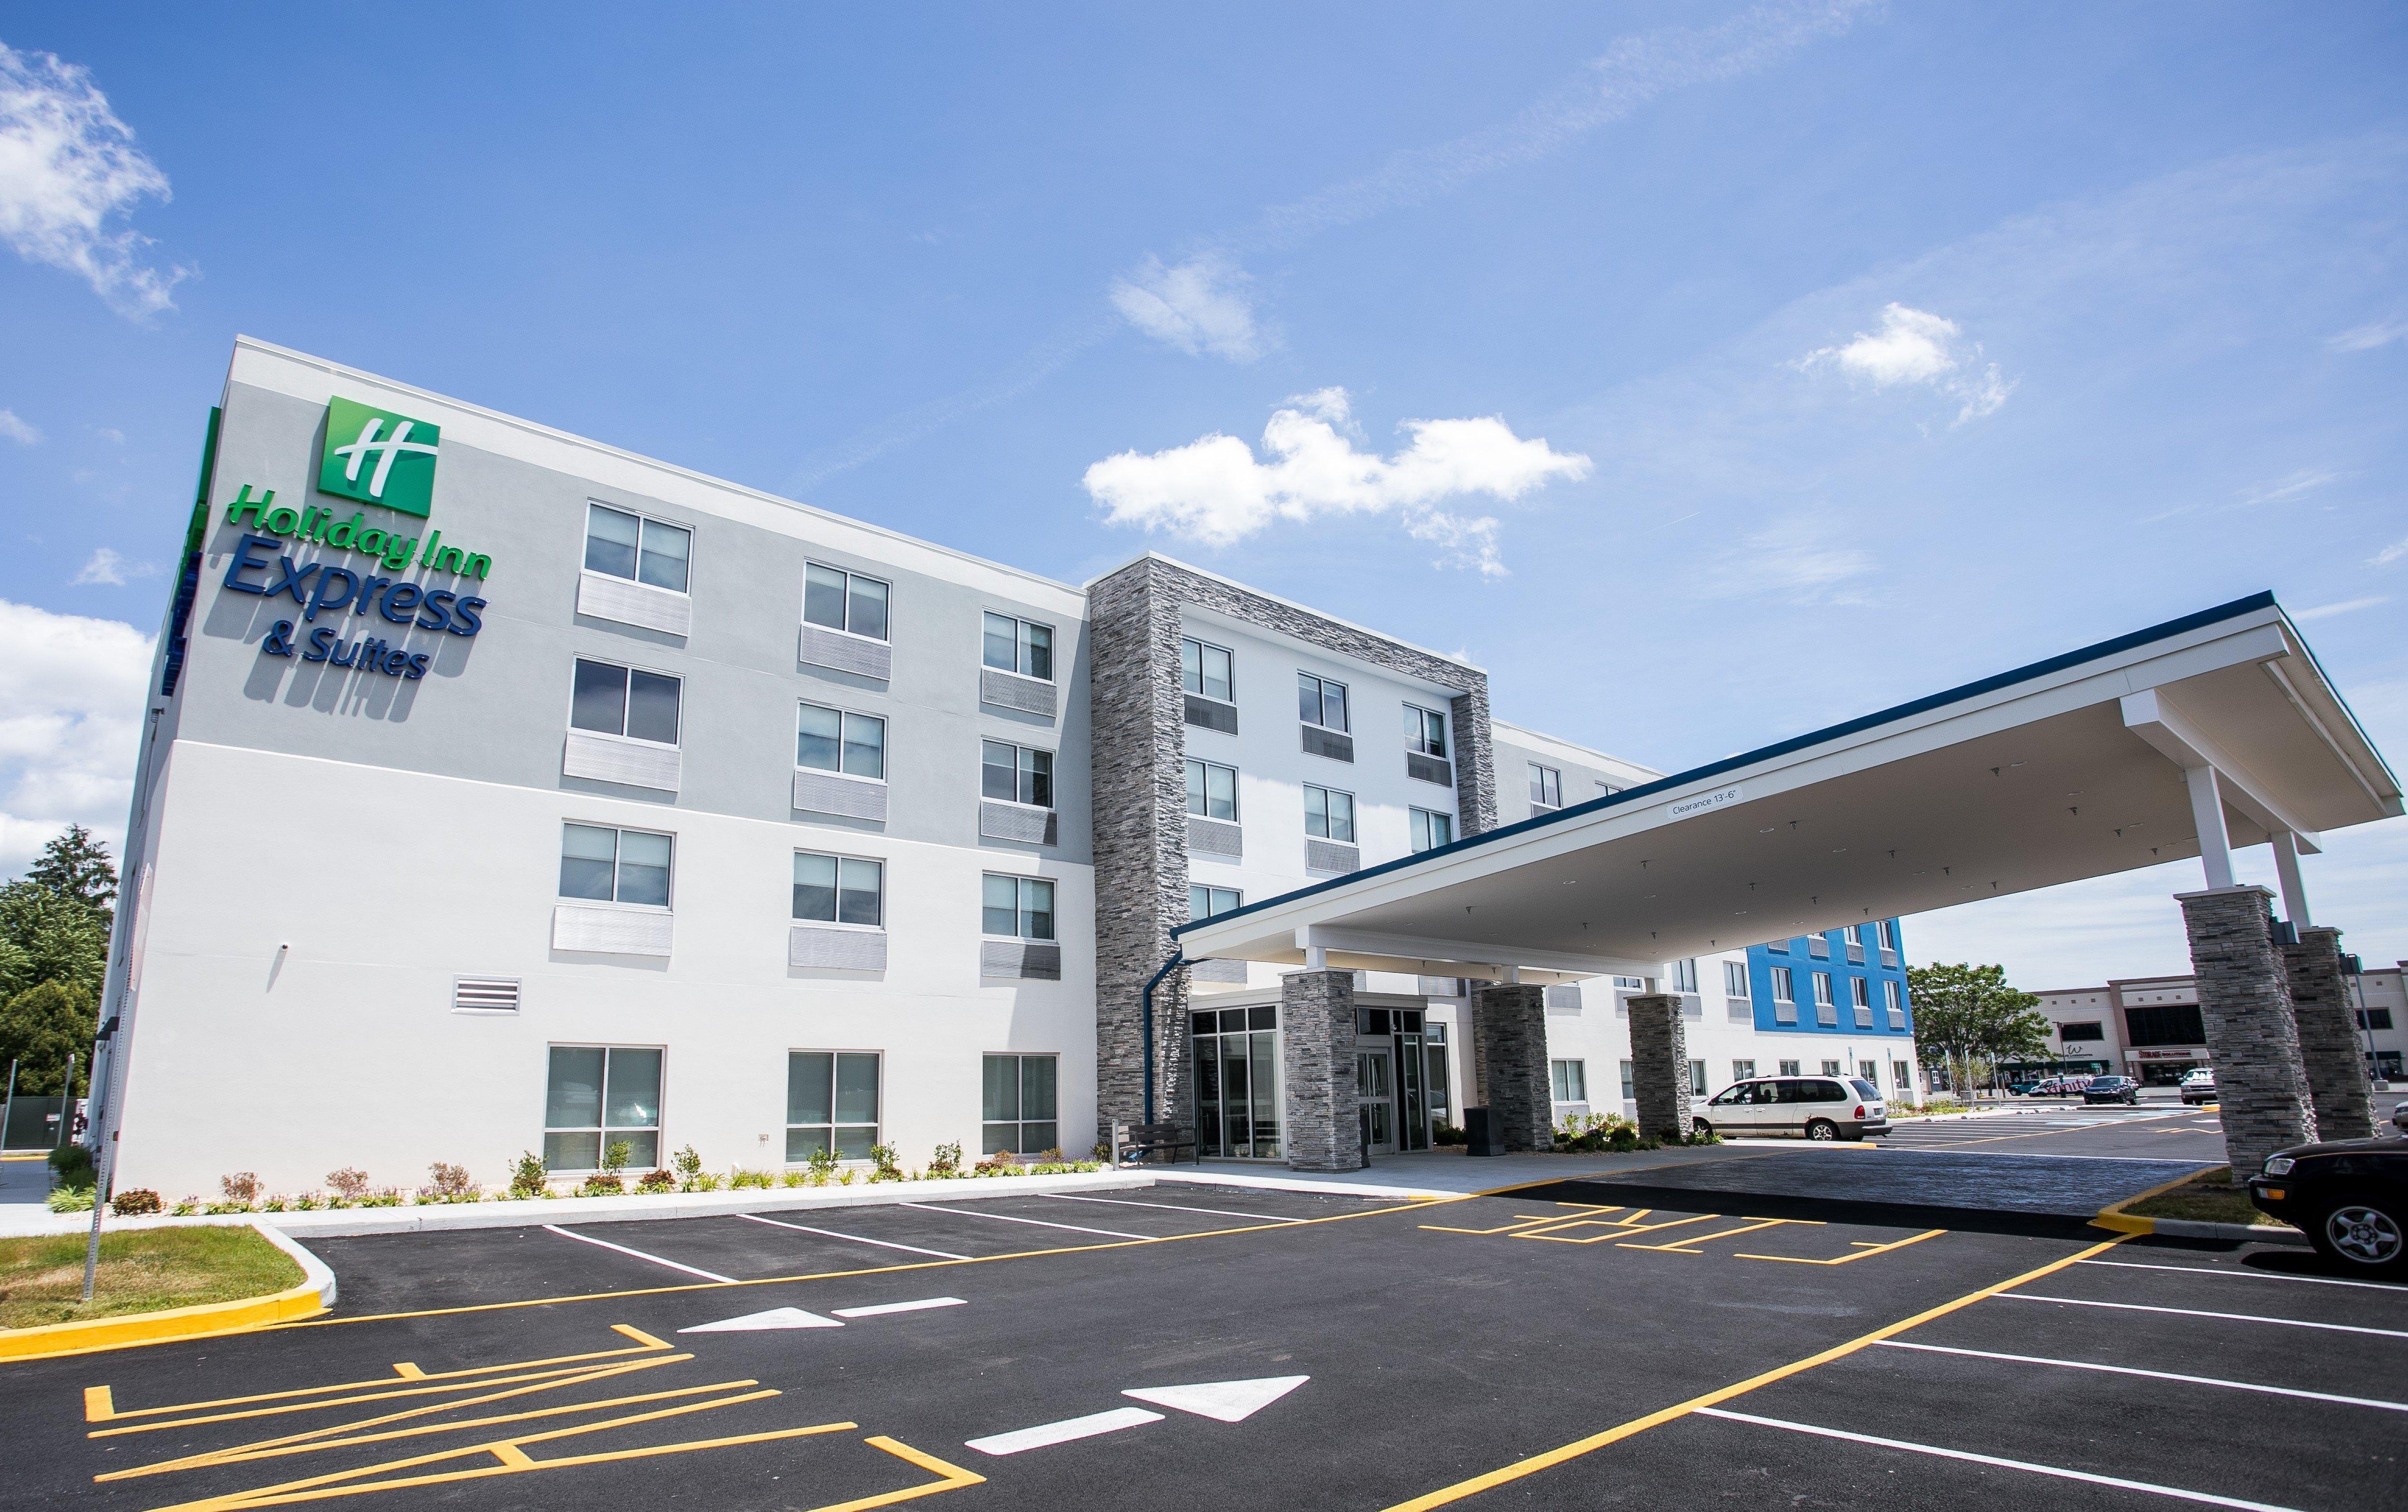 Holiday Inn Express & Suites Rehoboth Beach Exterior photo